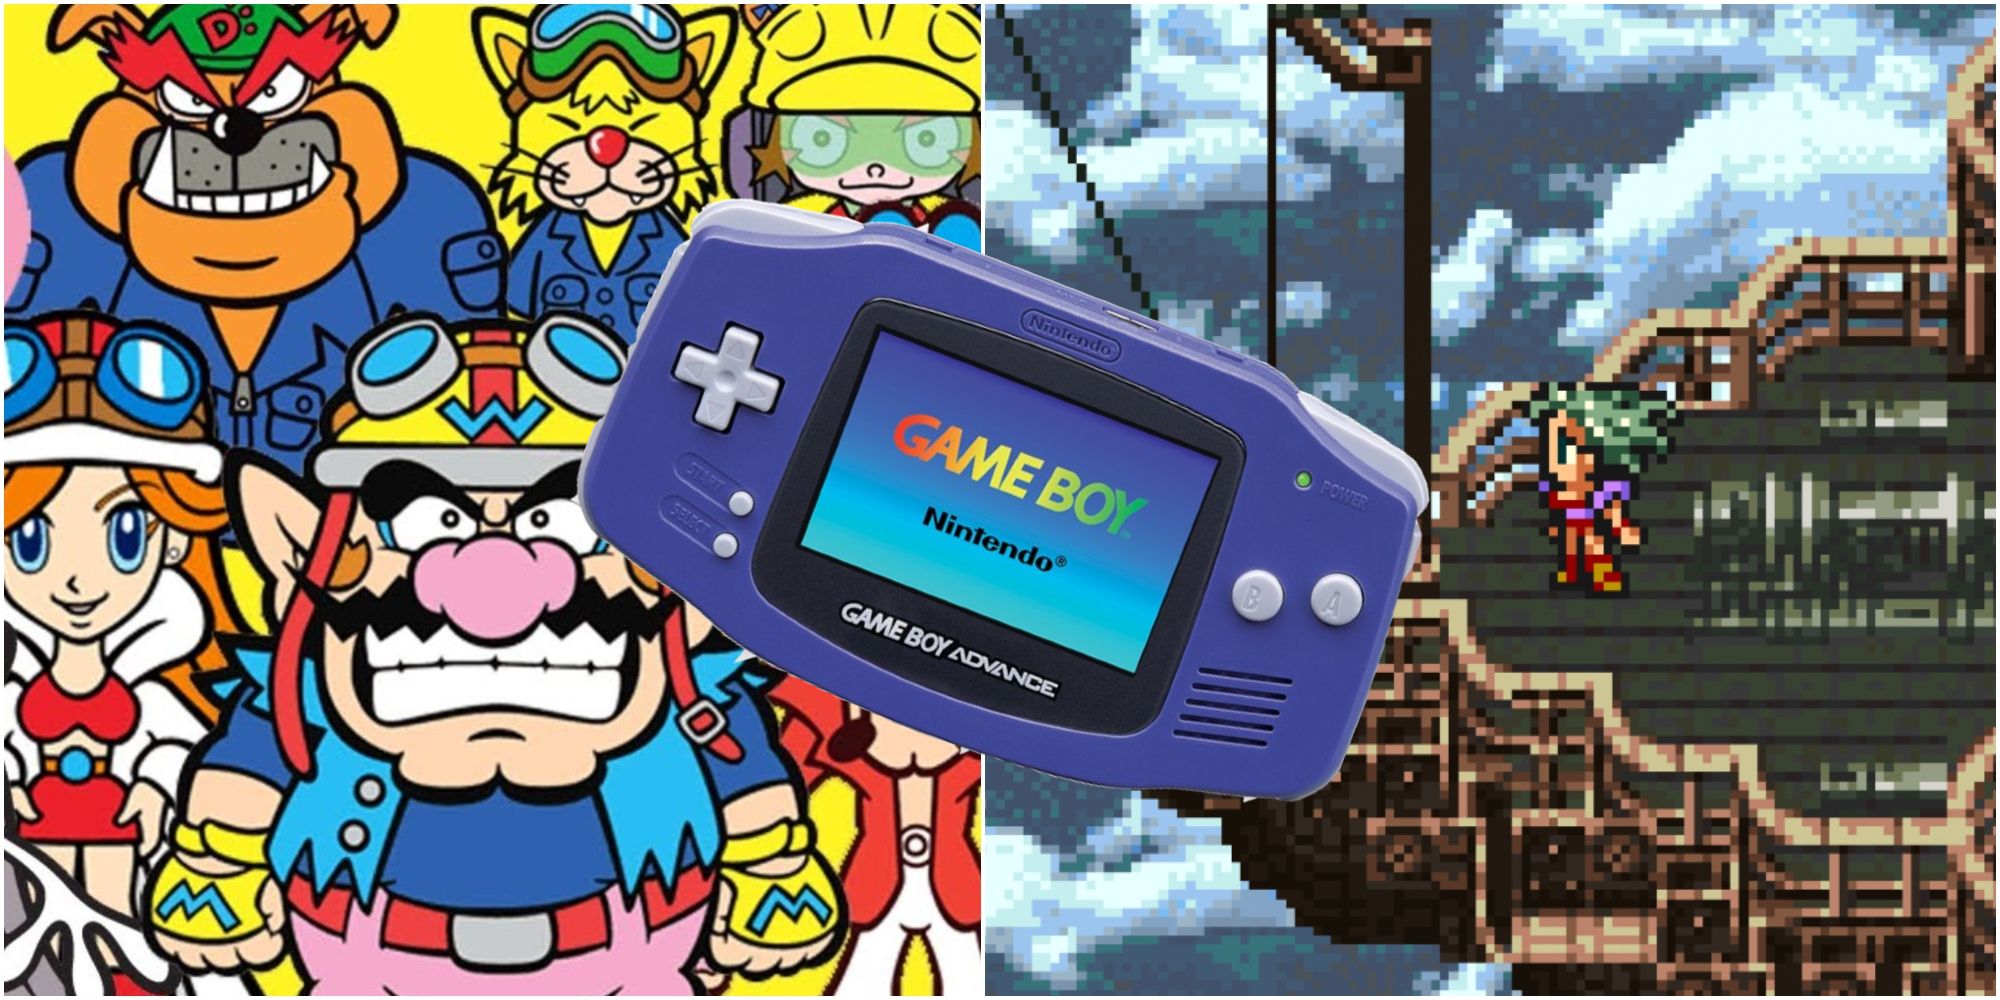 WarioWare and Final Fantasy 6 images with a Game Boy Advance in-between them